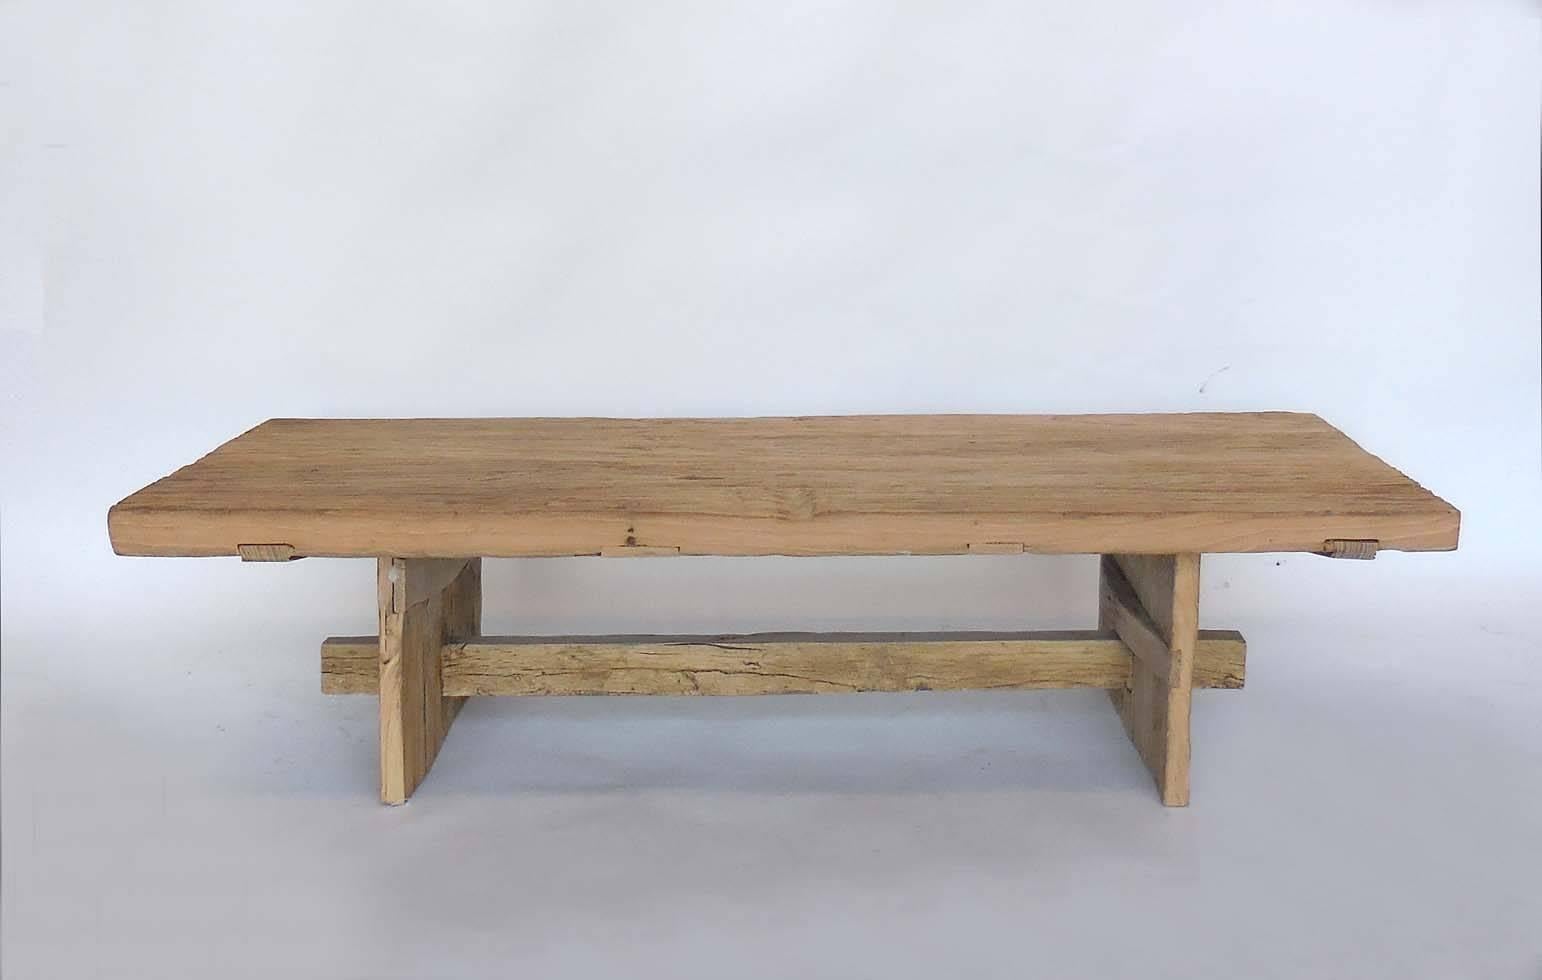 200-year old northern elmwood from Japan used to create this clean lined, rustic coffee table. Smooth to the touch, yet wonderfully weathered.